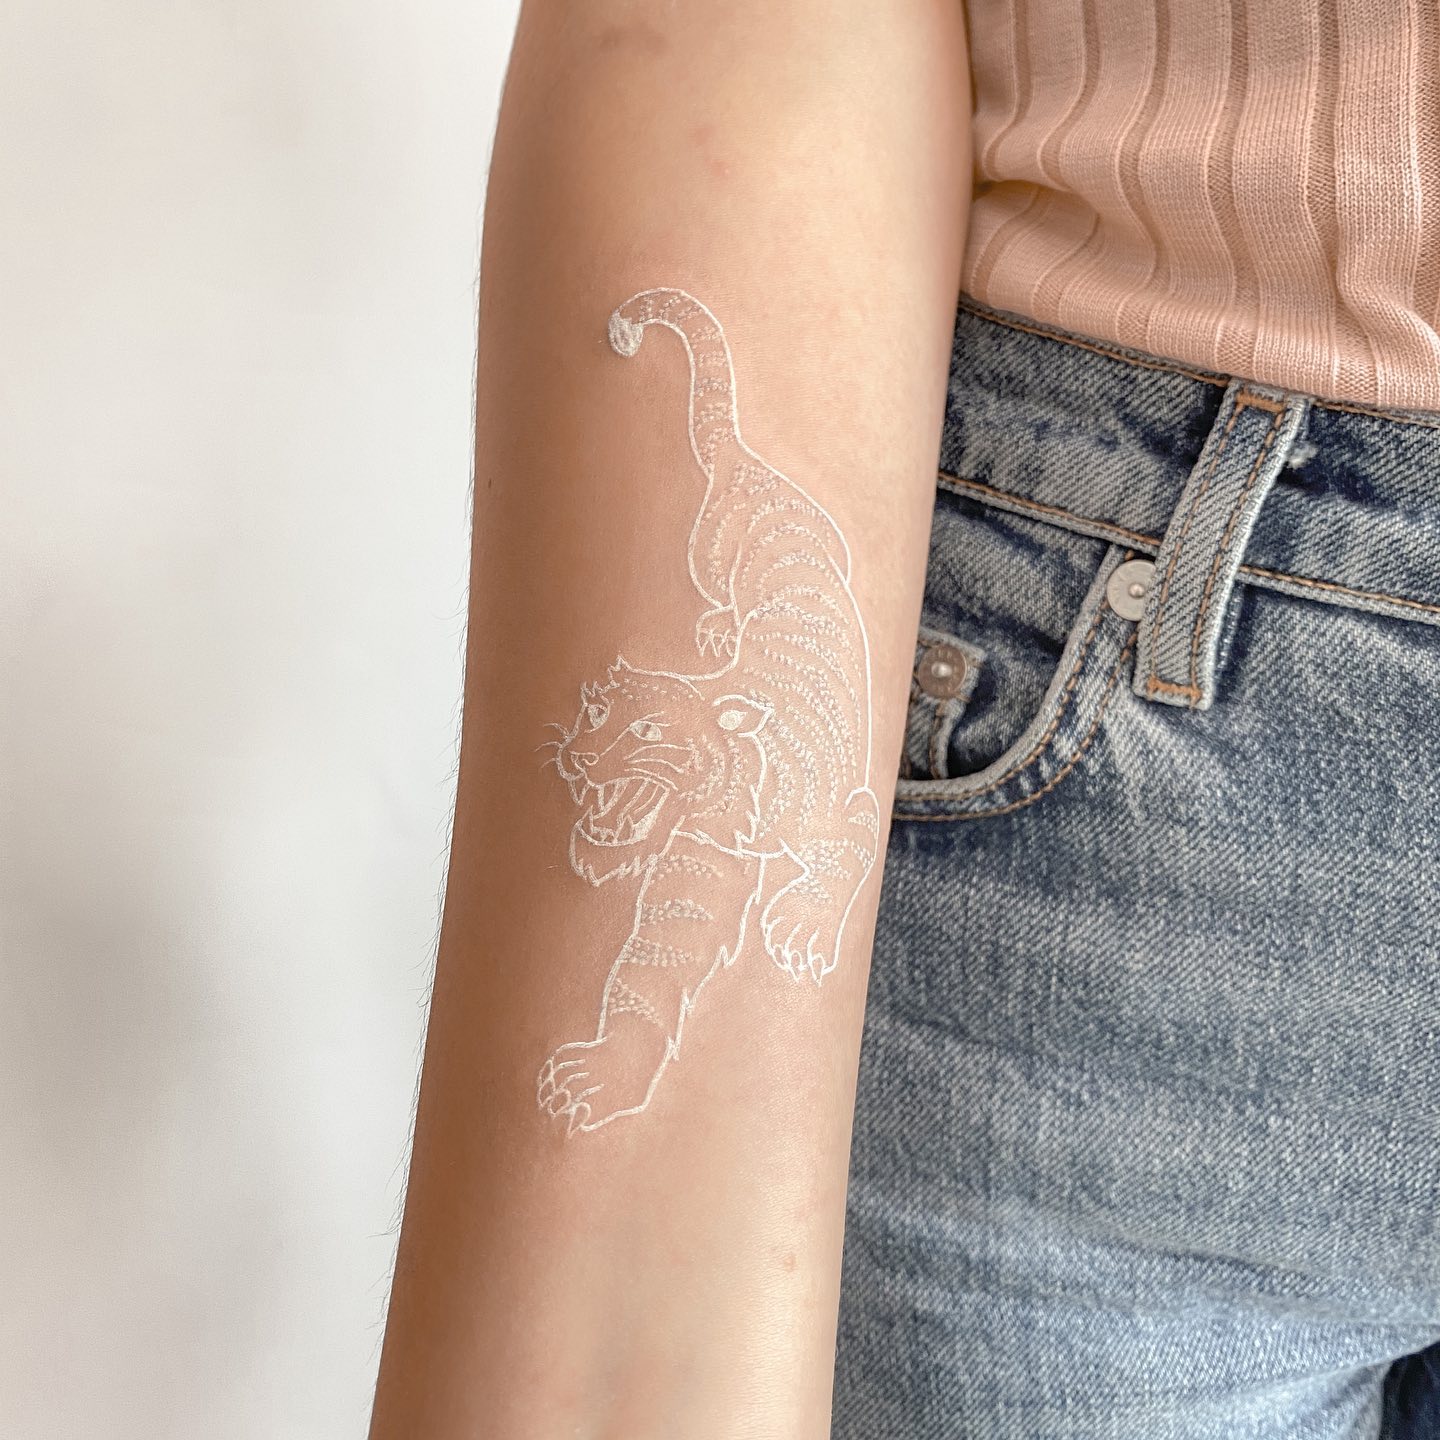 Tiger tattoos represent strength, good luck, wisdom and prosperity to the fullest. They are such majestic creatures and so beautiful. To honor that beauty, a white ink tiger tattoo would be a great way.